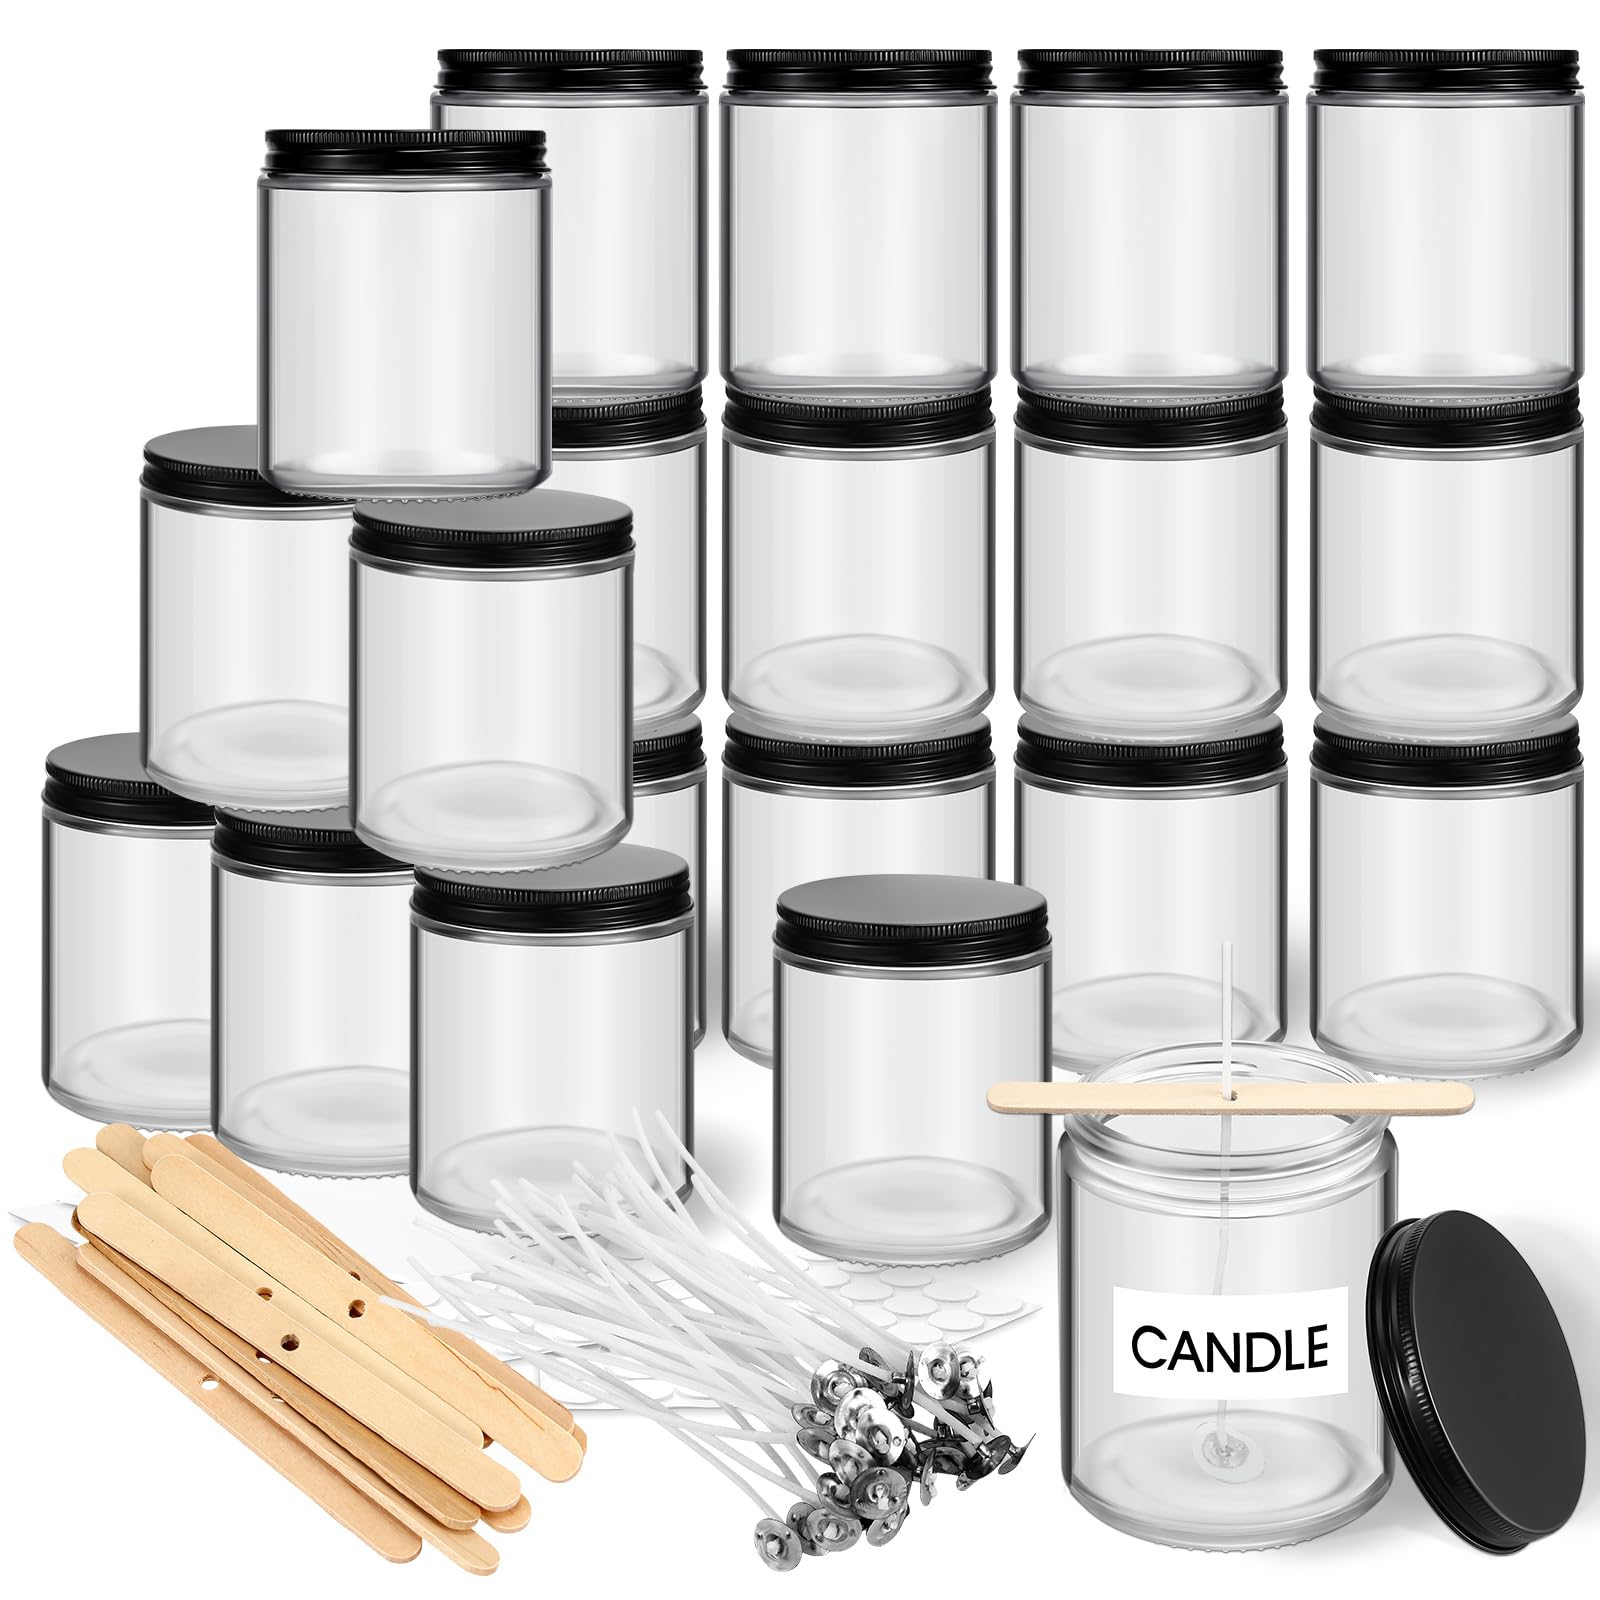 Dandat Candle Making Kit for Adults Beginners Candle Making Supplies DIY Crafts Kits including 20 Candle Jars with 100 Candle Wick 100 Wicks Stickers and Wooden Centering Devices for Making Candles